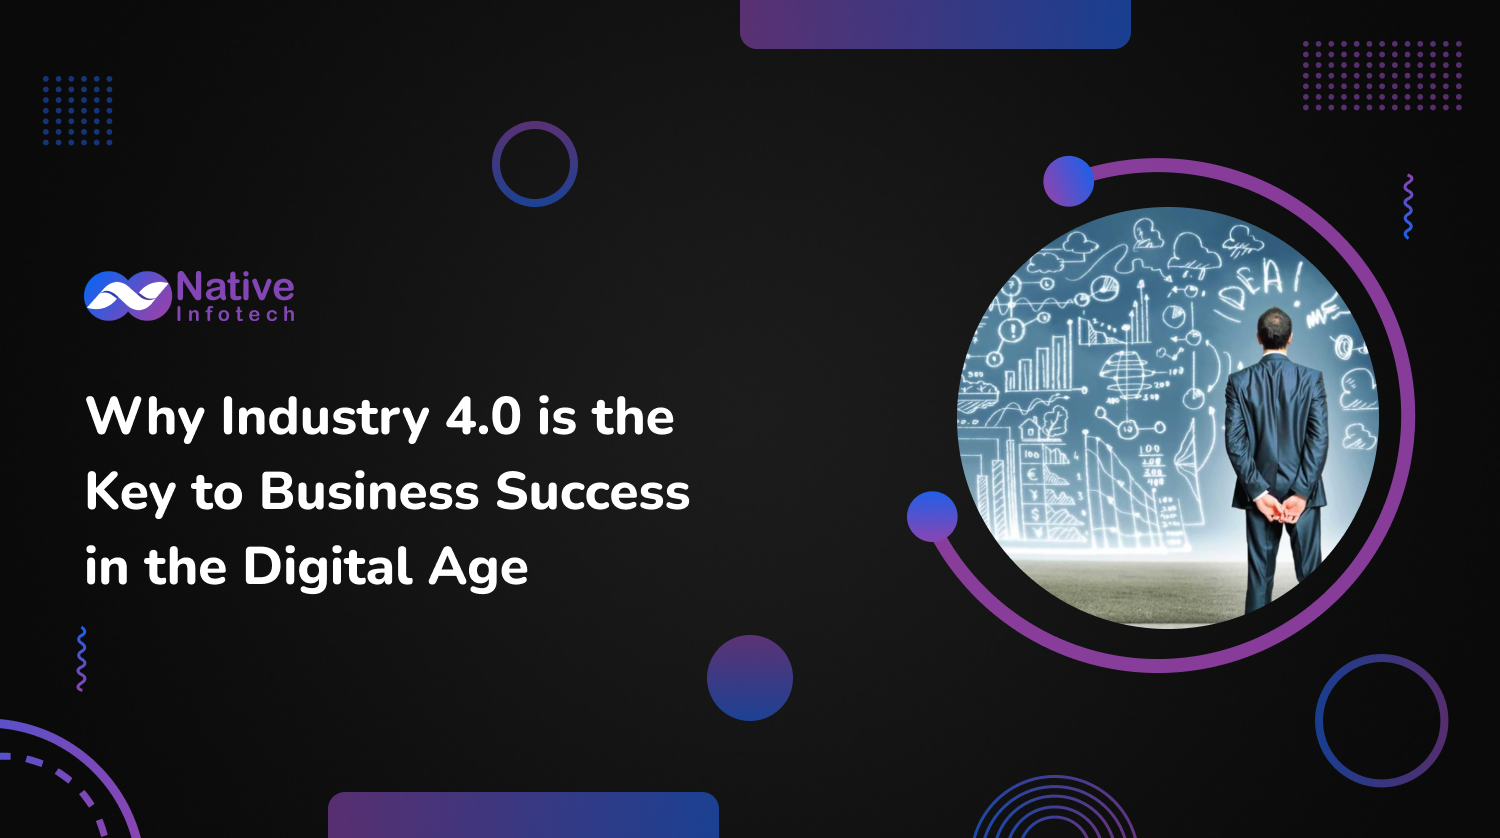 Why Industry 4.0 is the Key to Business Success in the Digital Age | Native Infotech